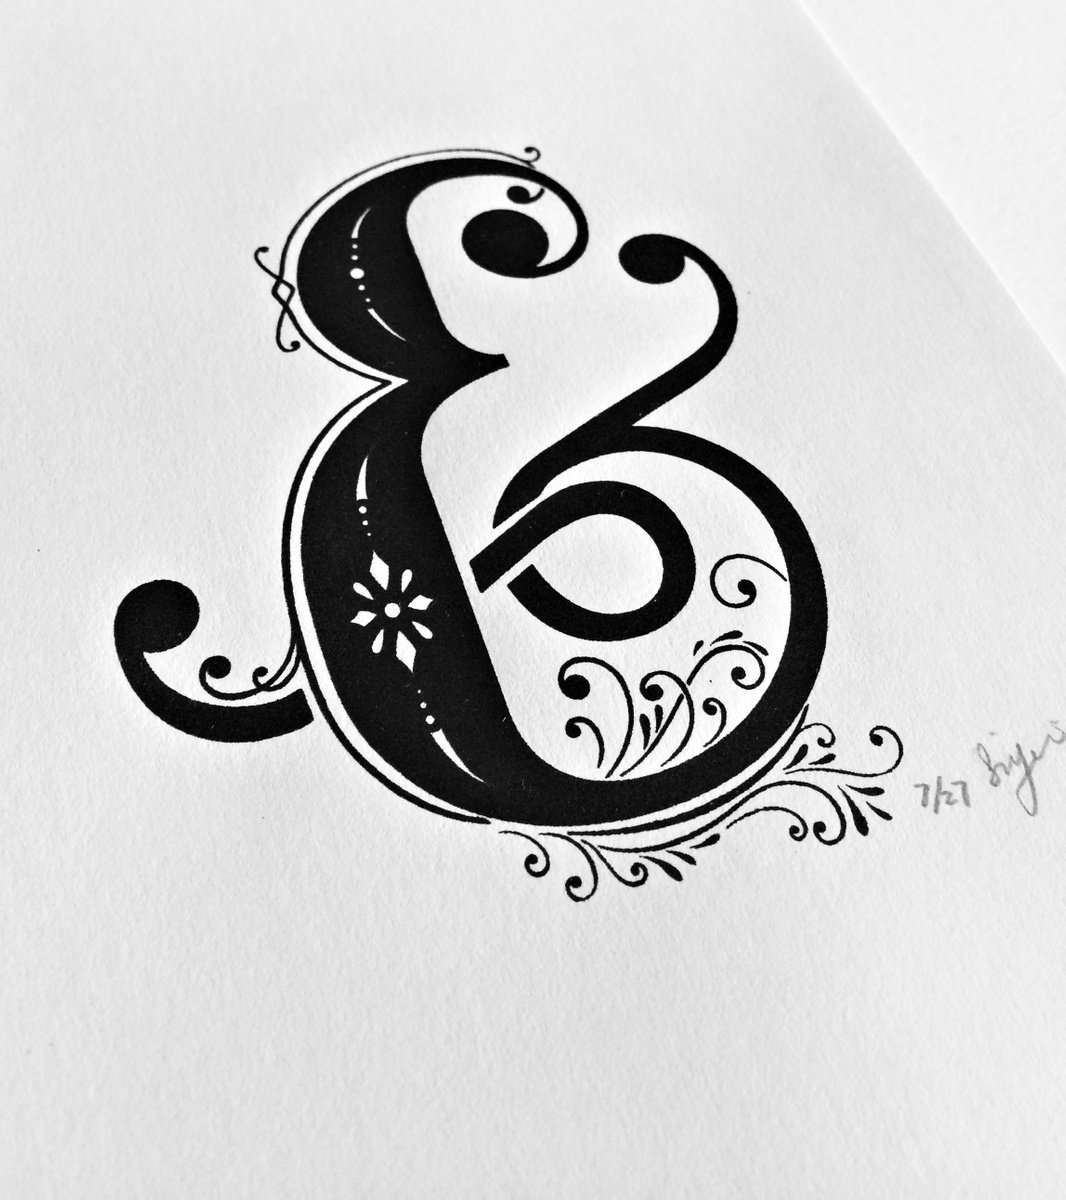 Ampersand Wall Art, A5 Screen Printed Black And White Typography Print by DoodleDuck Designs